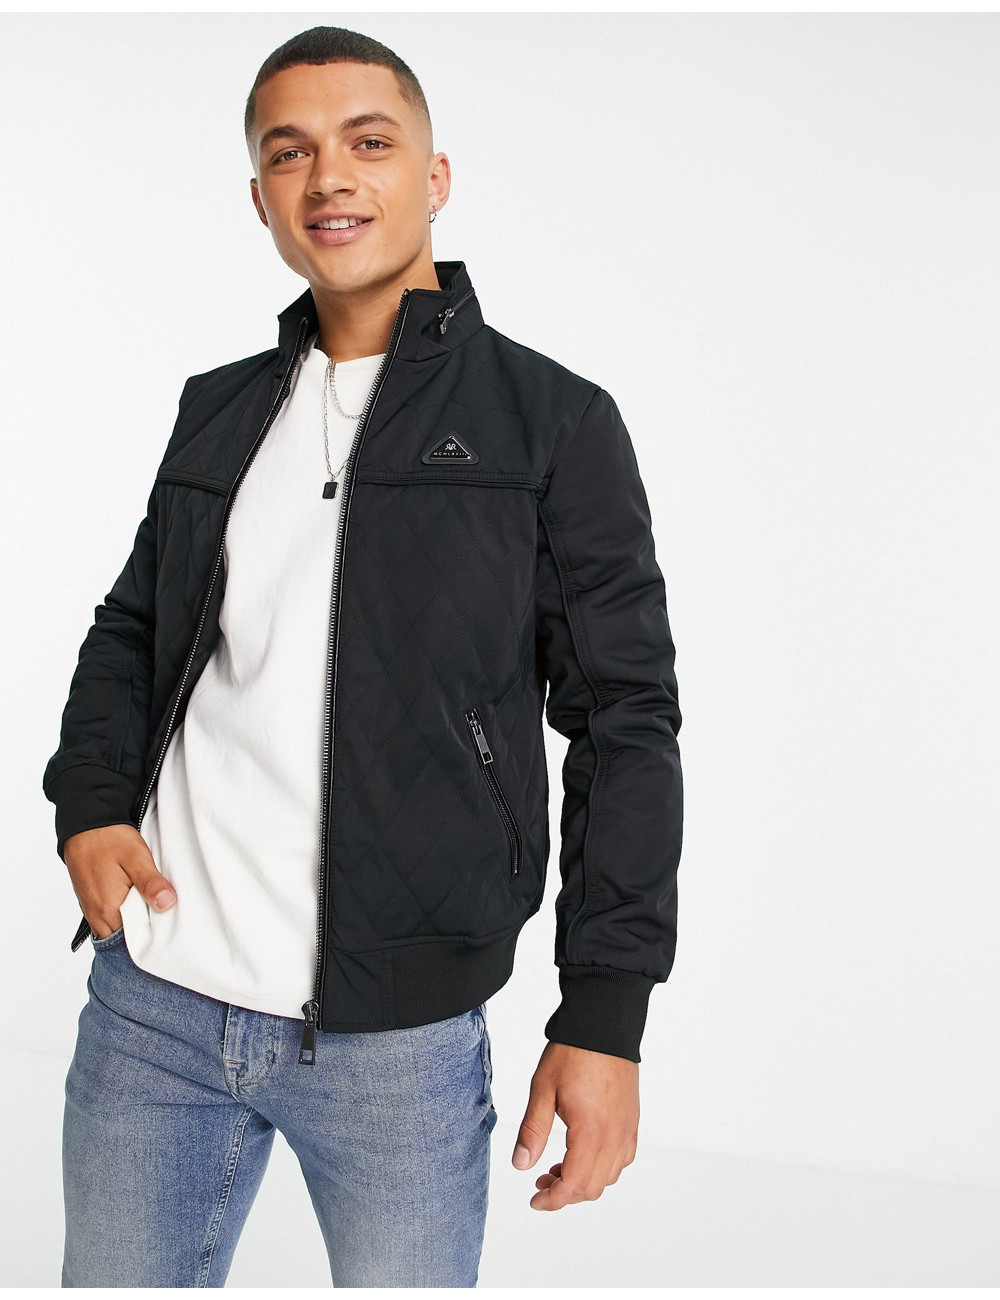 River Island quilted jacket...